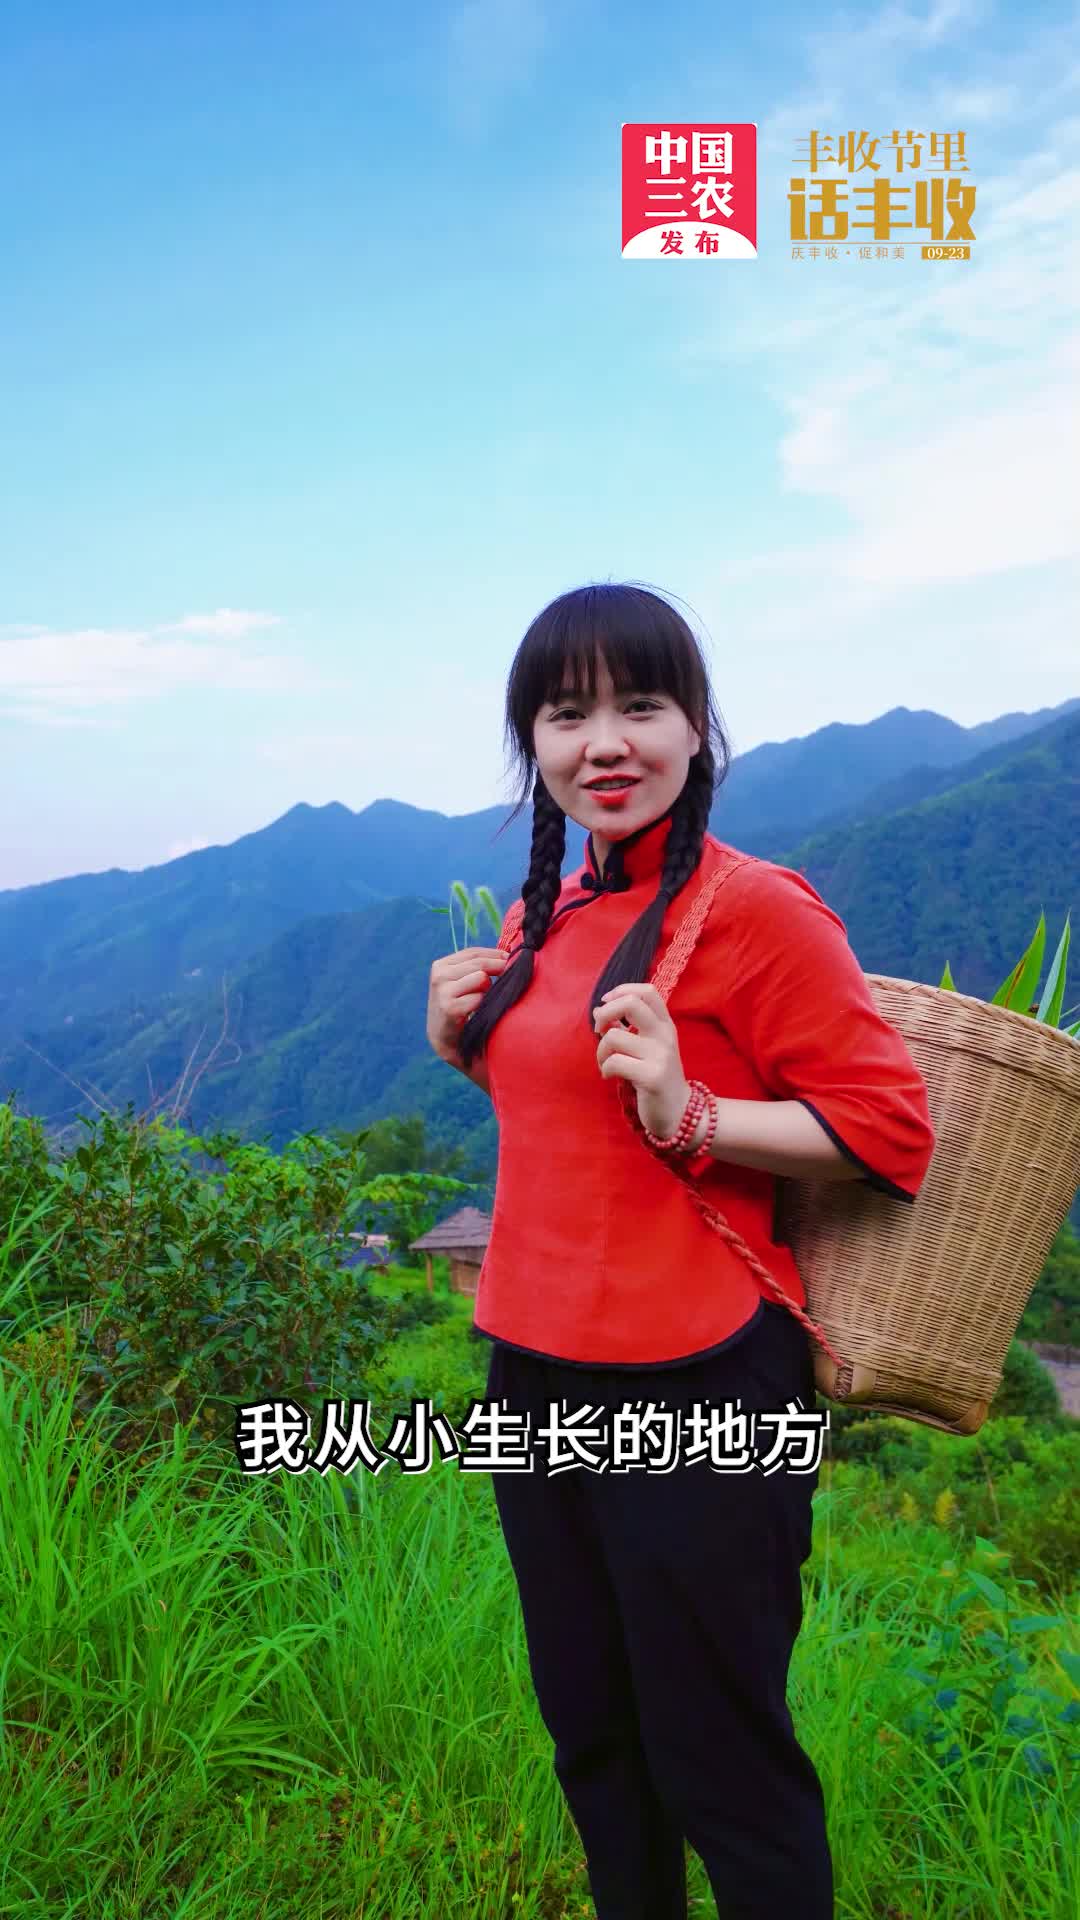  China's agriculture, rural areas and farmers released the news of a bumper harvest in the V # Harvest Festival of the All Netizens University. Xiangmei's treasure of agricultural products in her hometown: See the harvest of Xinhua Huangjing, Xinhua Black Tea, and ZiQuejie Gongmi!